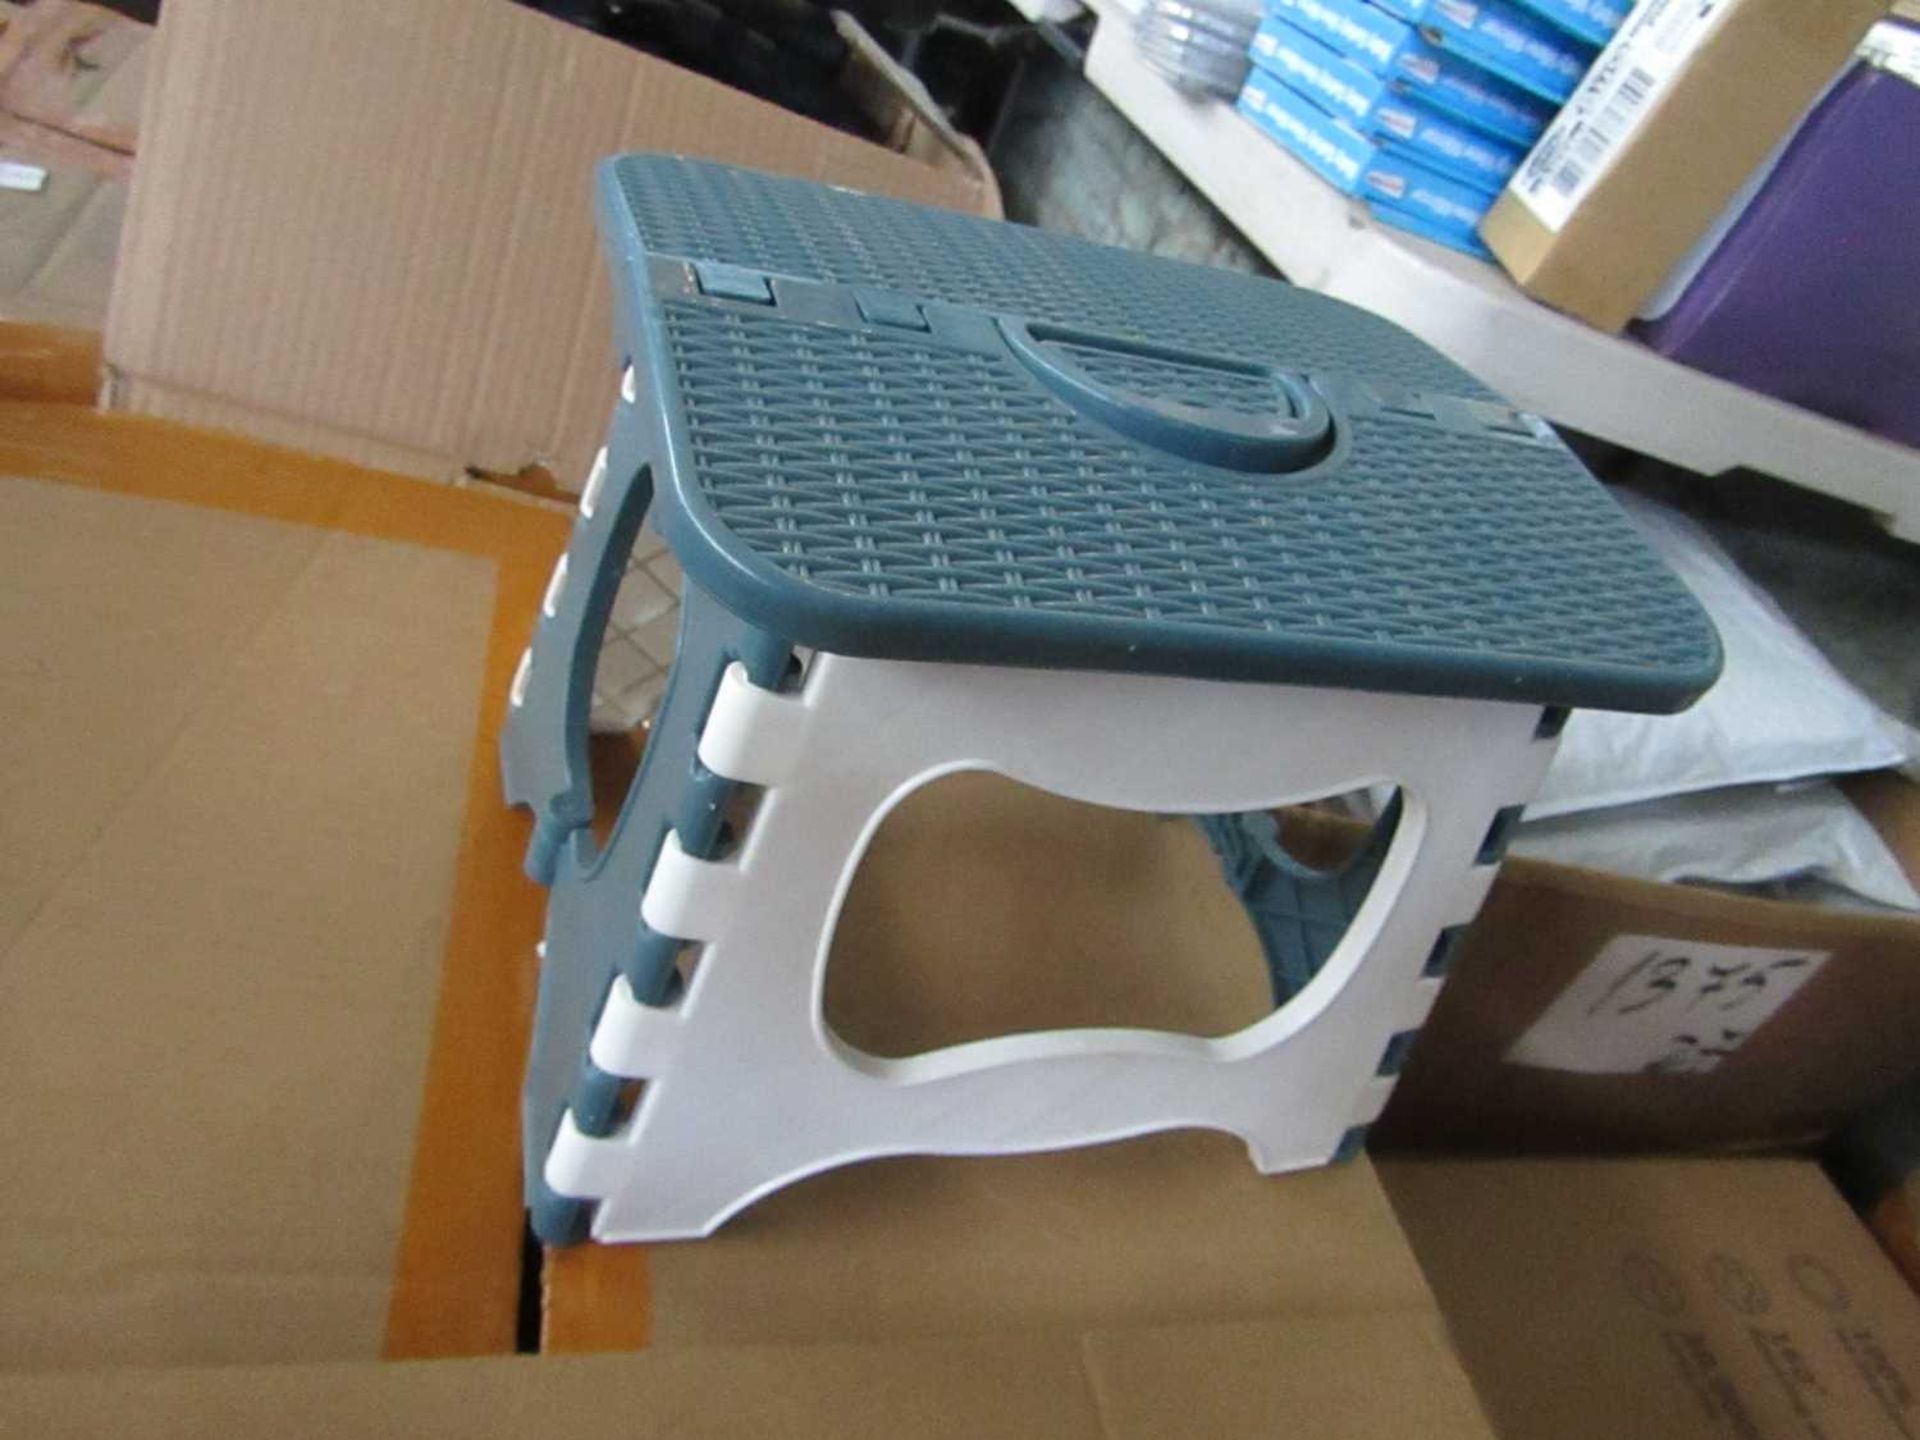 VAT 2x Folding Step Stool Plastic Foldable Stool Outdoor Portable - New & Packaged.